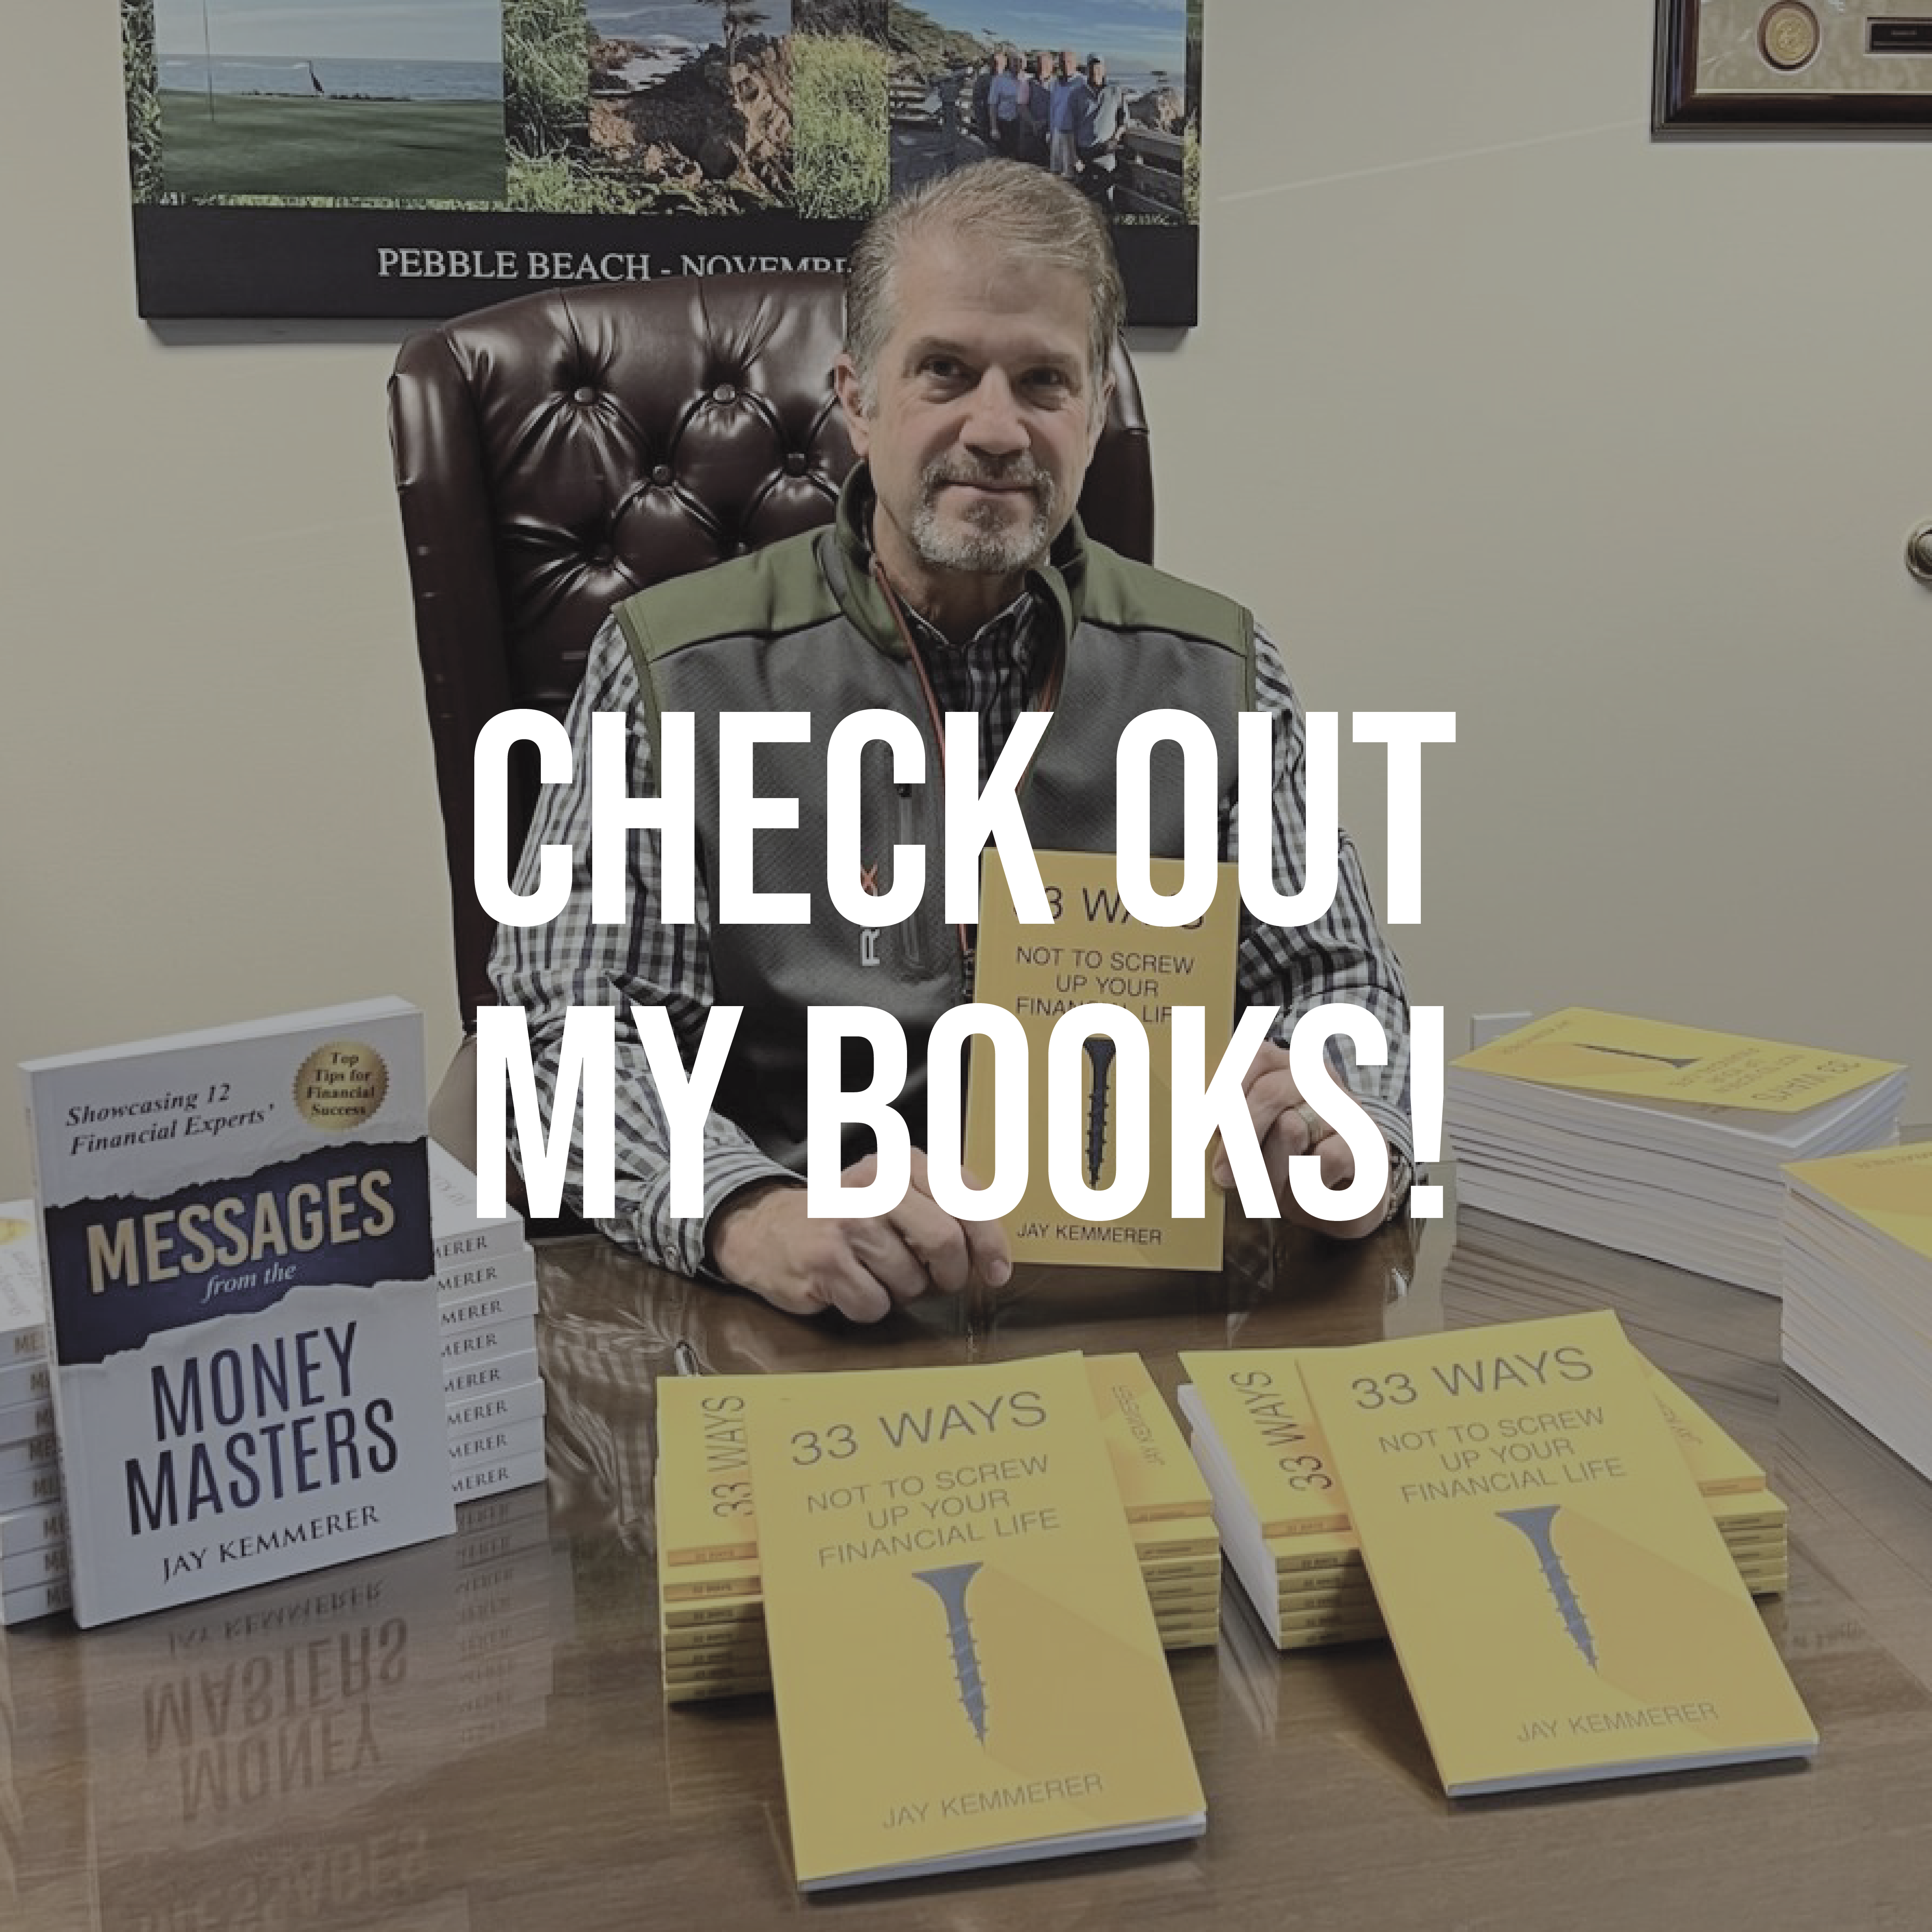 Jay Kemmerer Books Messages from the Money Masters 33 Ways Not to Screw Up your financial life